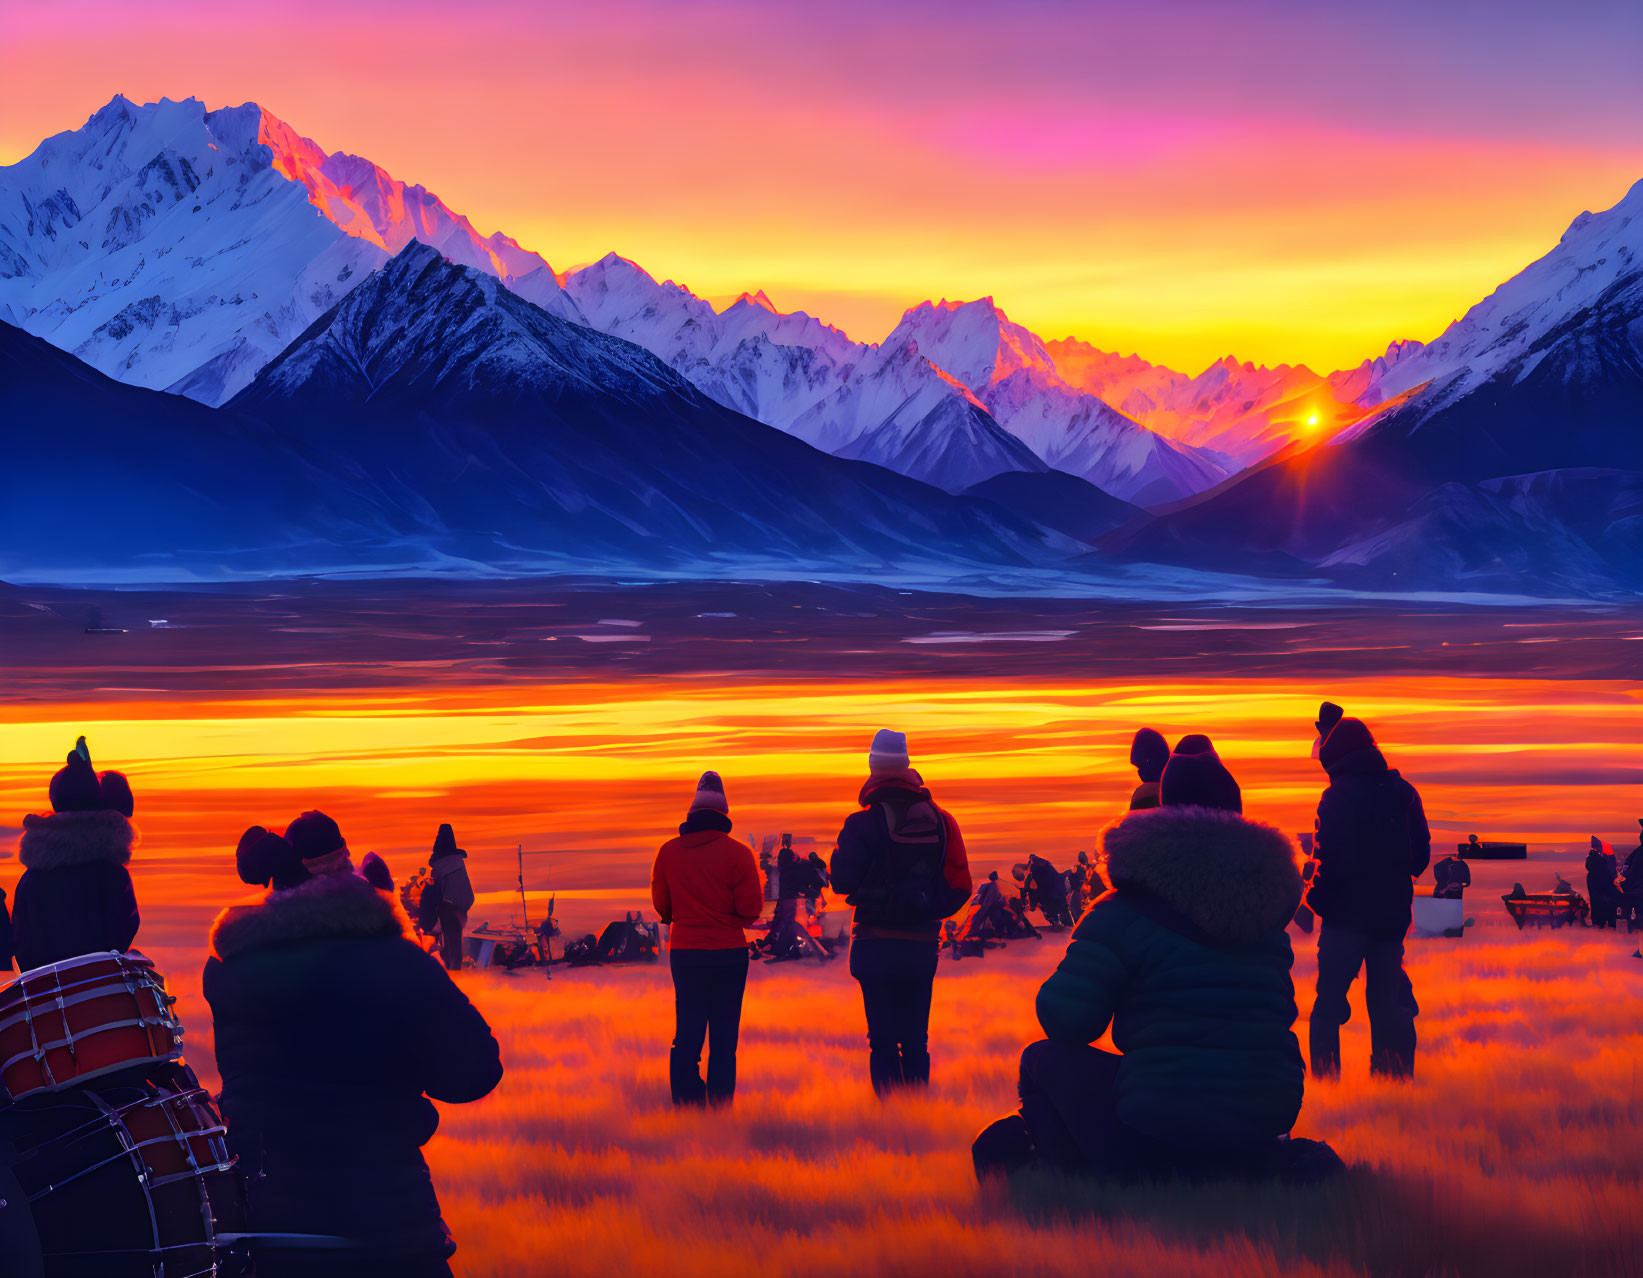 Group of People Watching Vibrant Sunrise Over Snow-Capped Mountains